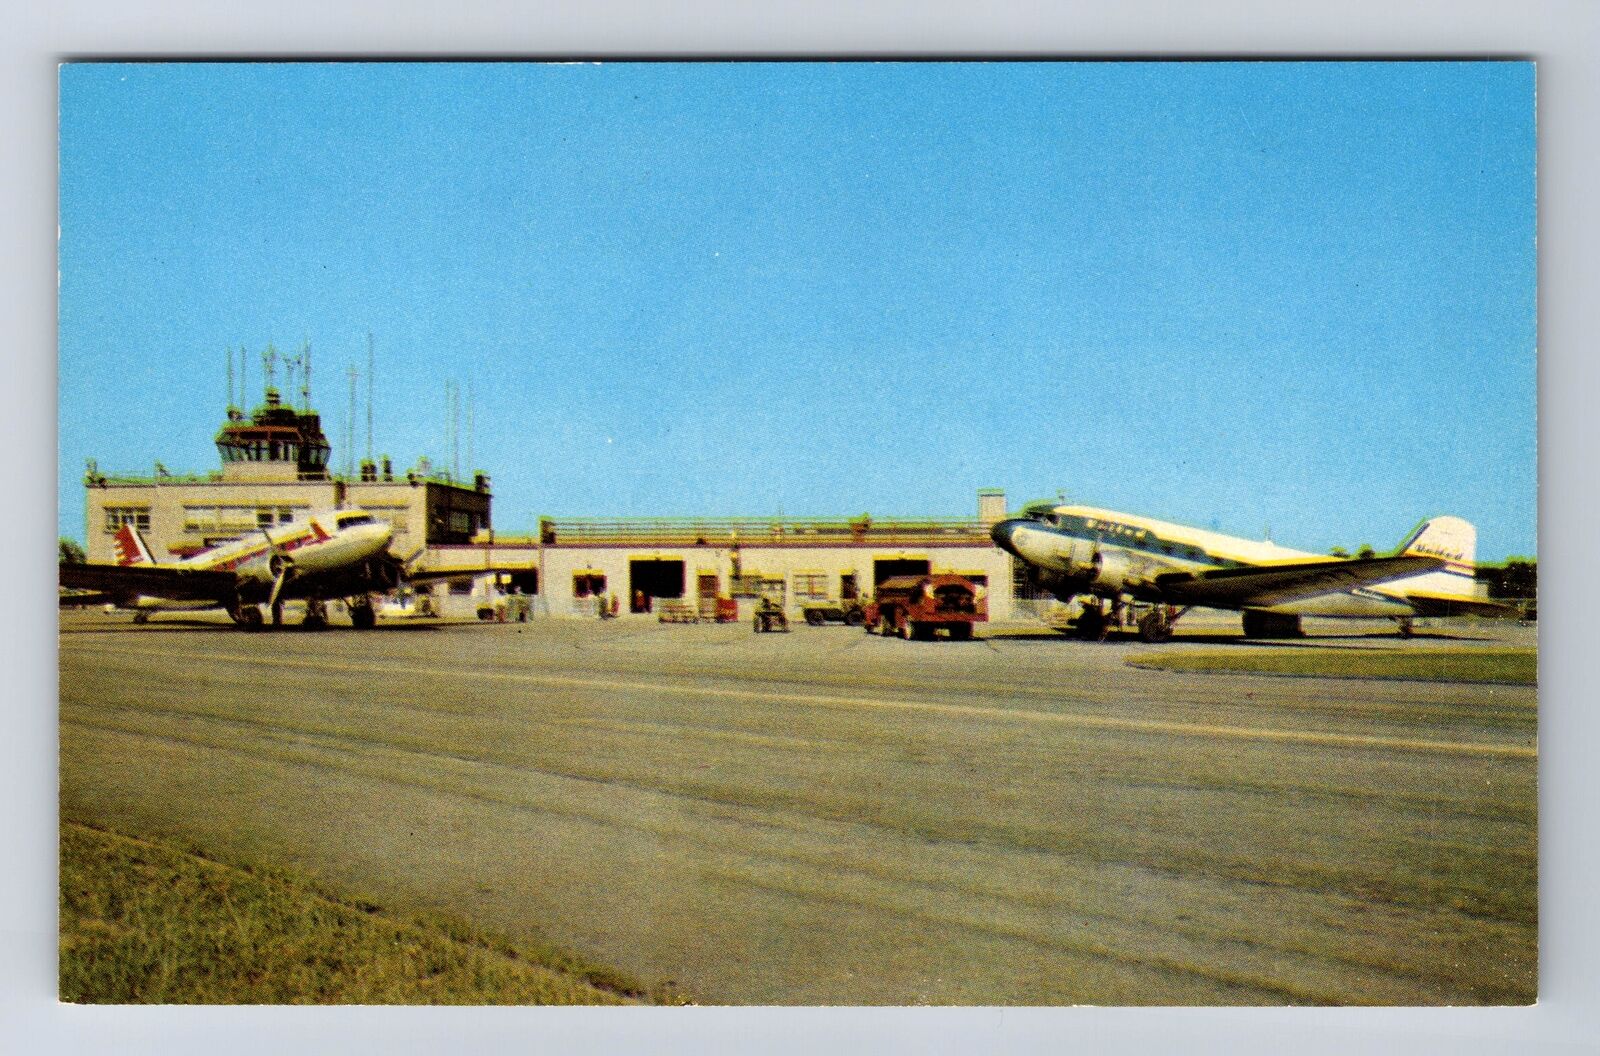 Youngstown OH-Ohio, Youngstown Municipal Airport, Antique Vintage Postcard